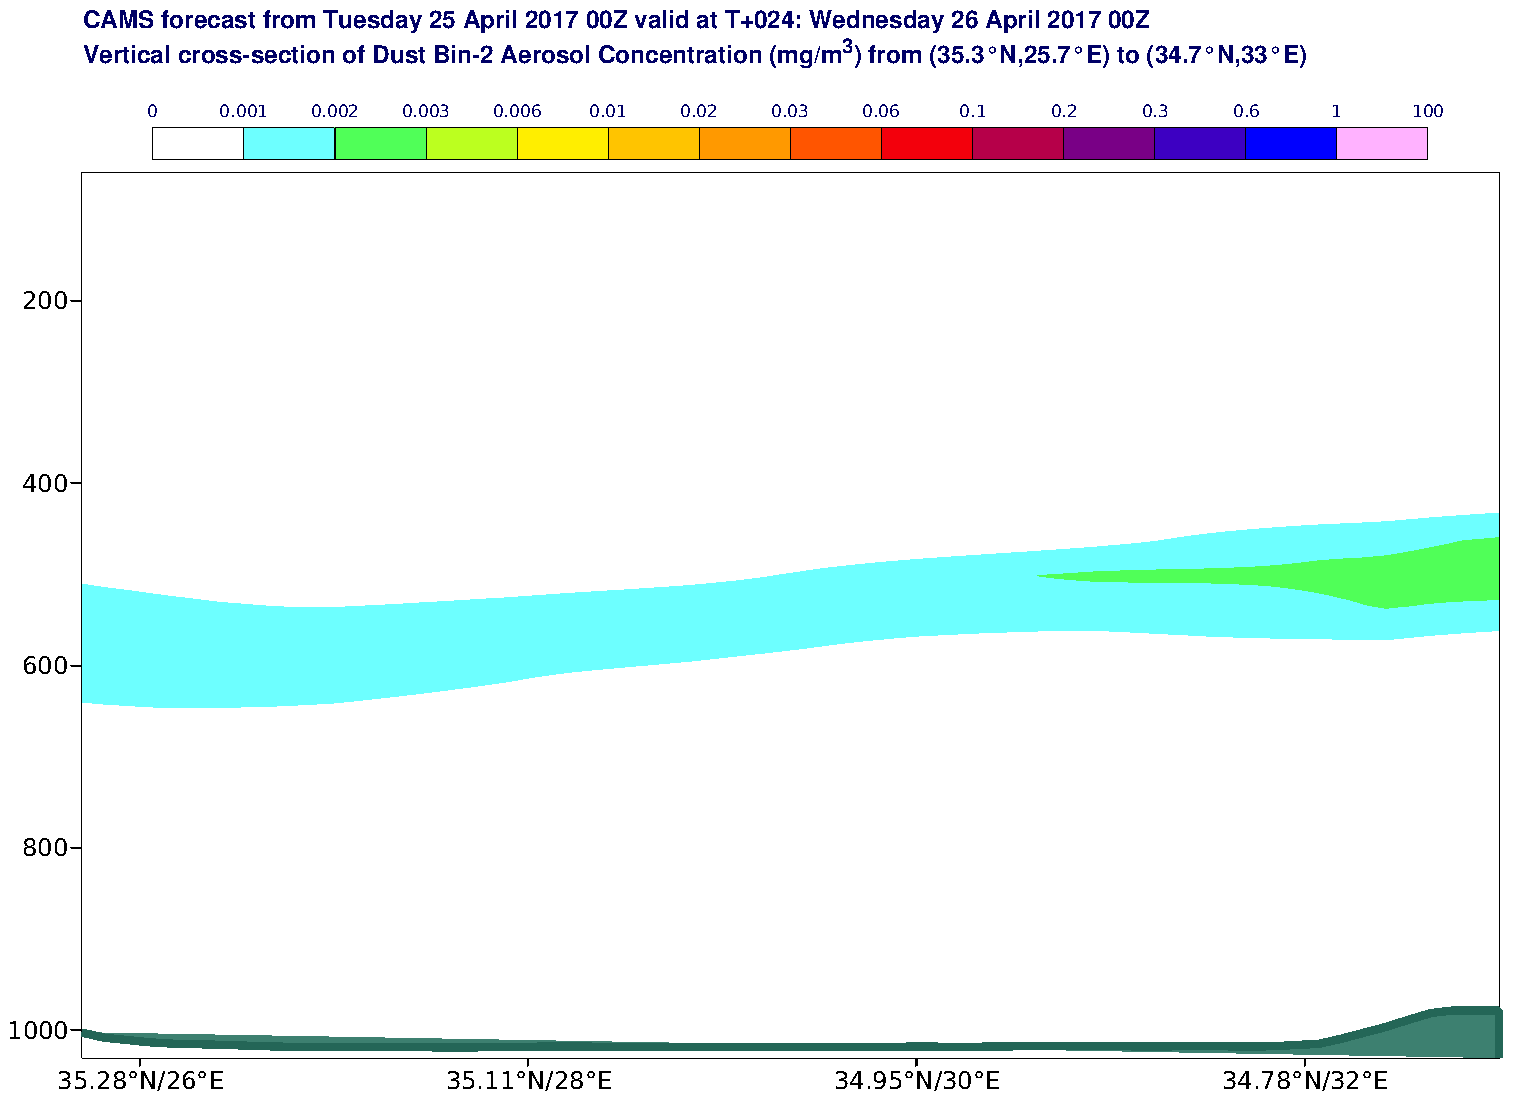 Vertical cross-section of Dust Bin-2 Aerosol Concentration (mg/m3) valid at T24 - 2017-04-26 00:00